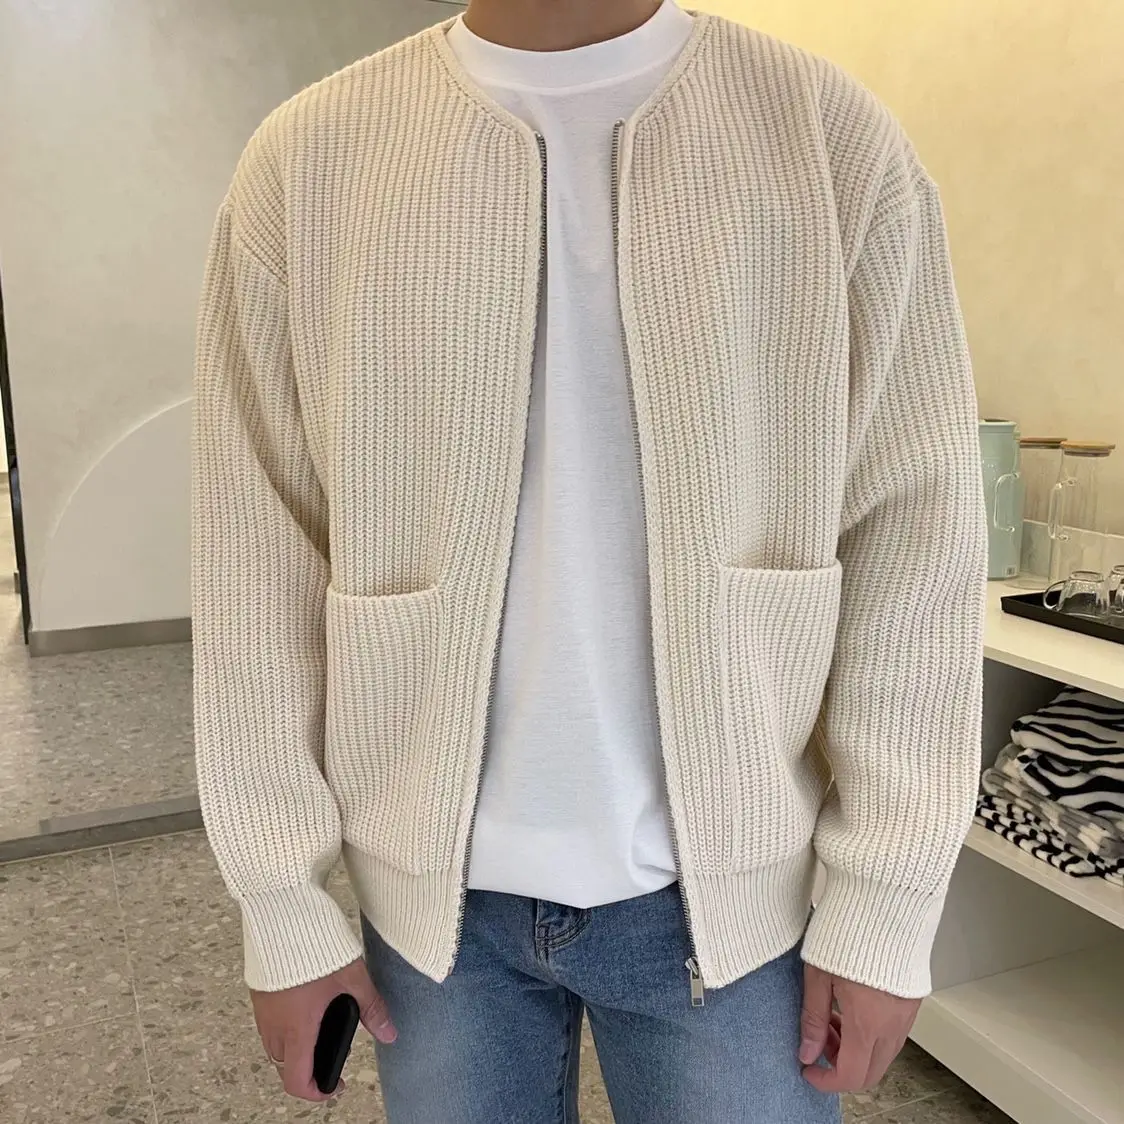 

Fitted Sweater Long Male Slim Spring Zippers Knitwear Autumn 2022 Cardigan Casual Men New Cardigans Knitted Sleeve Fashion